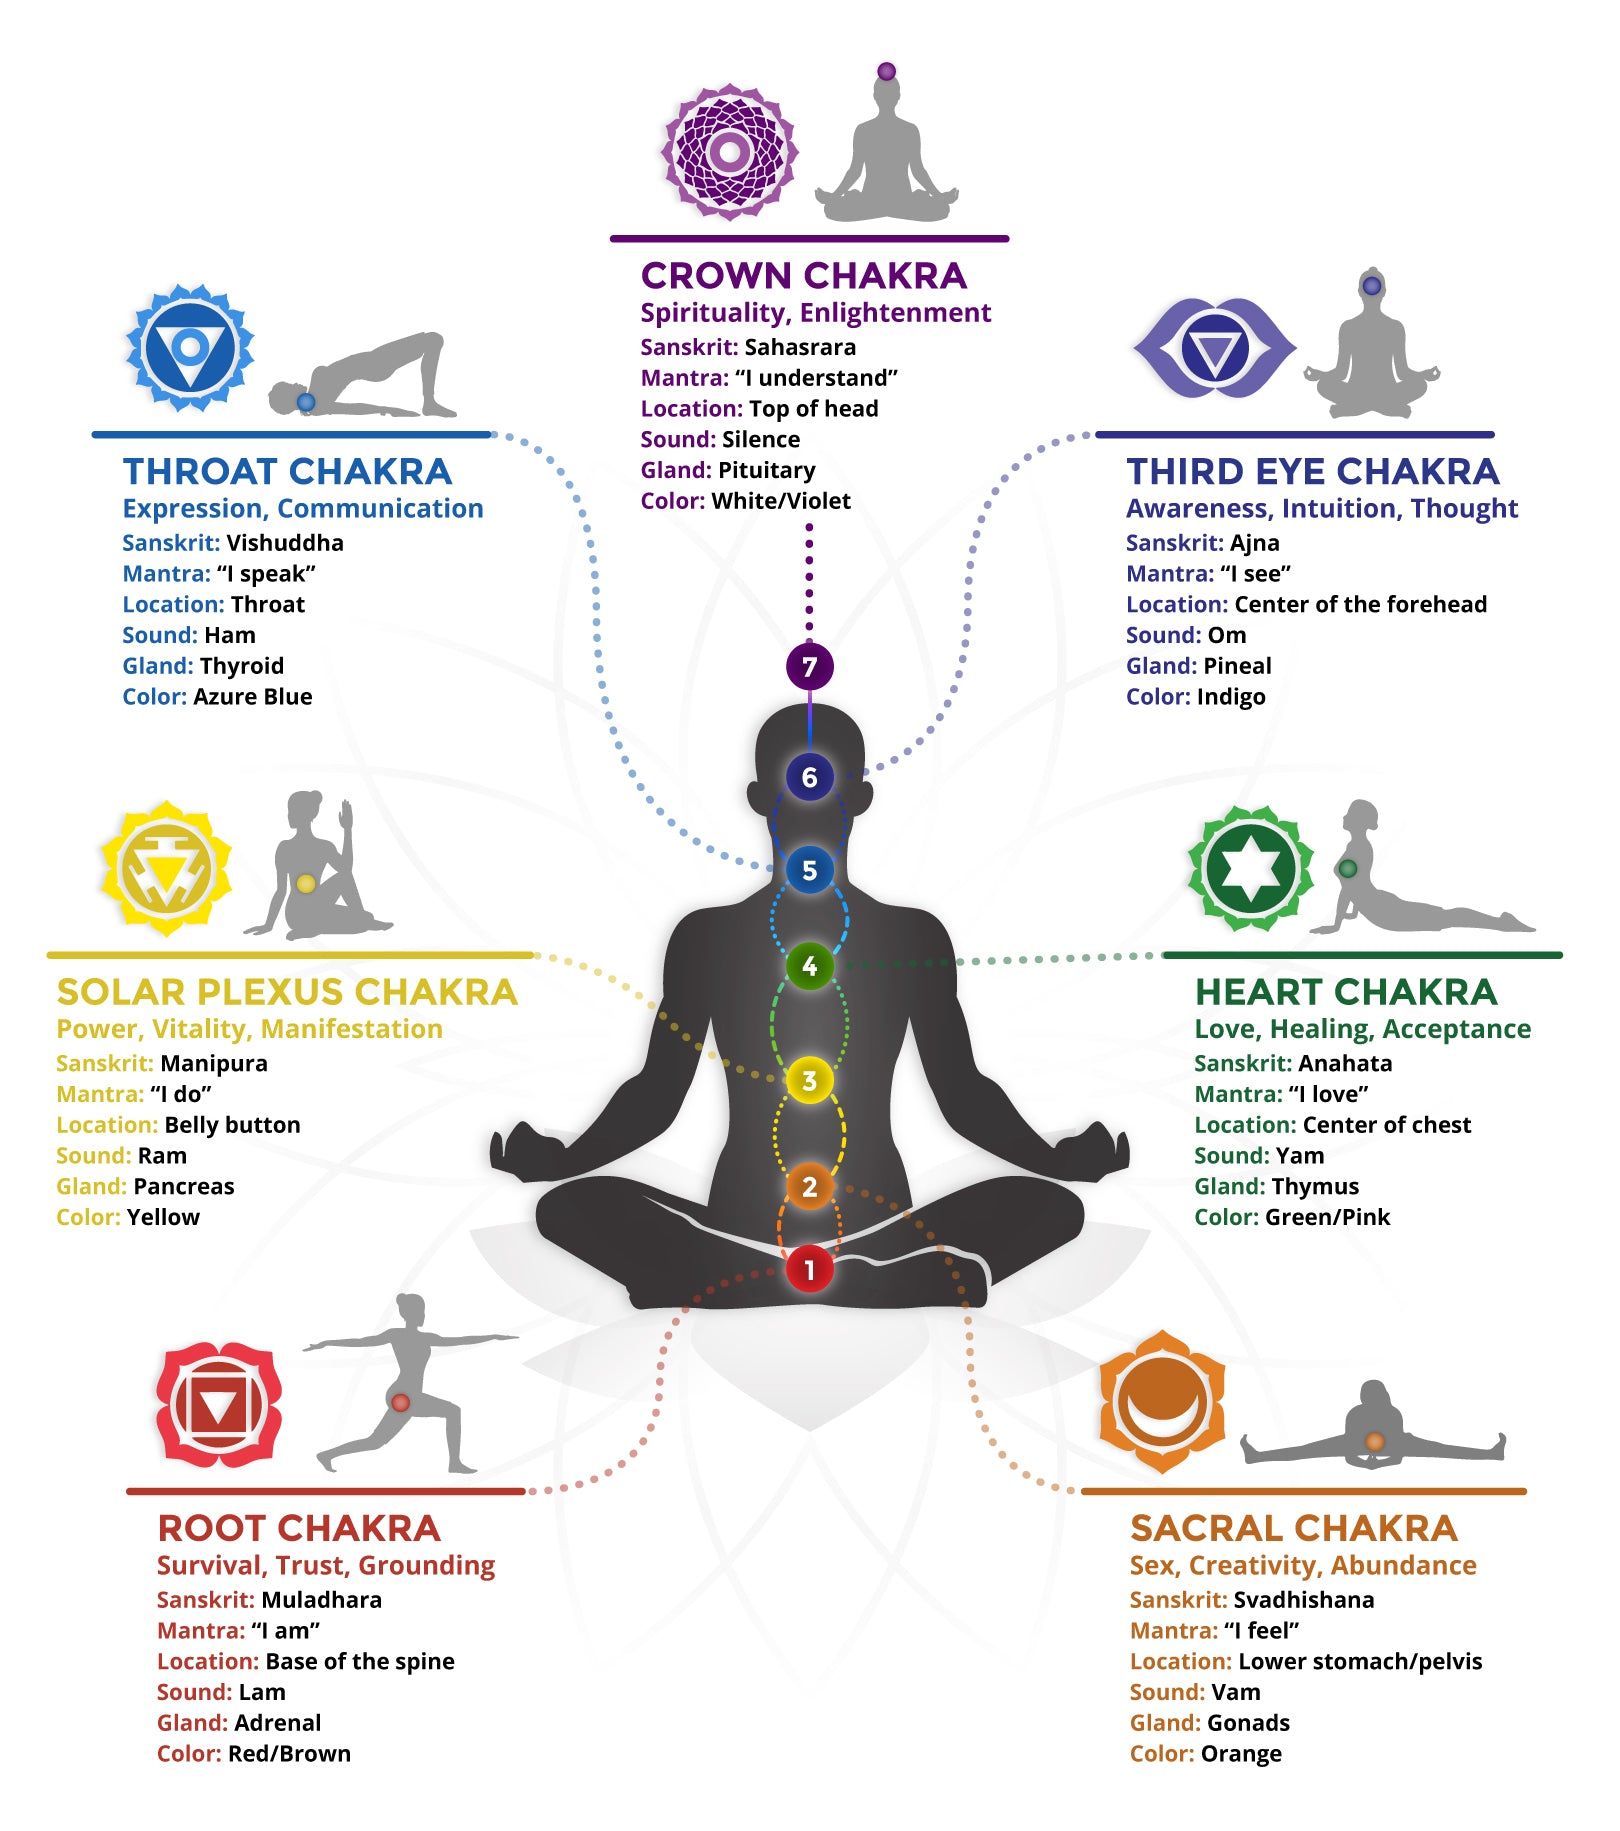 The Ultimate Guide to Chakras: Colors, Symbols, Glands, & Their Meanings!